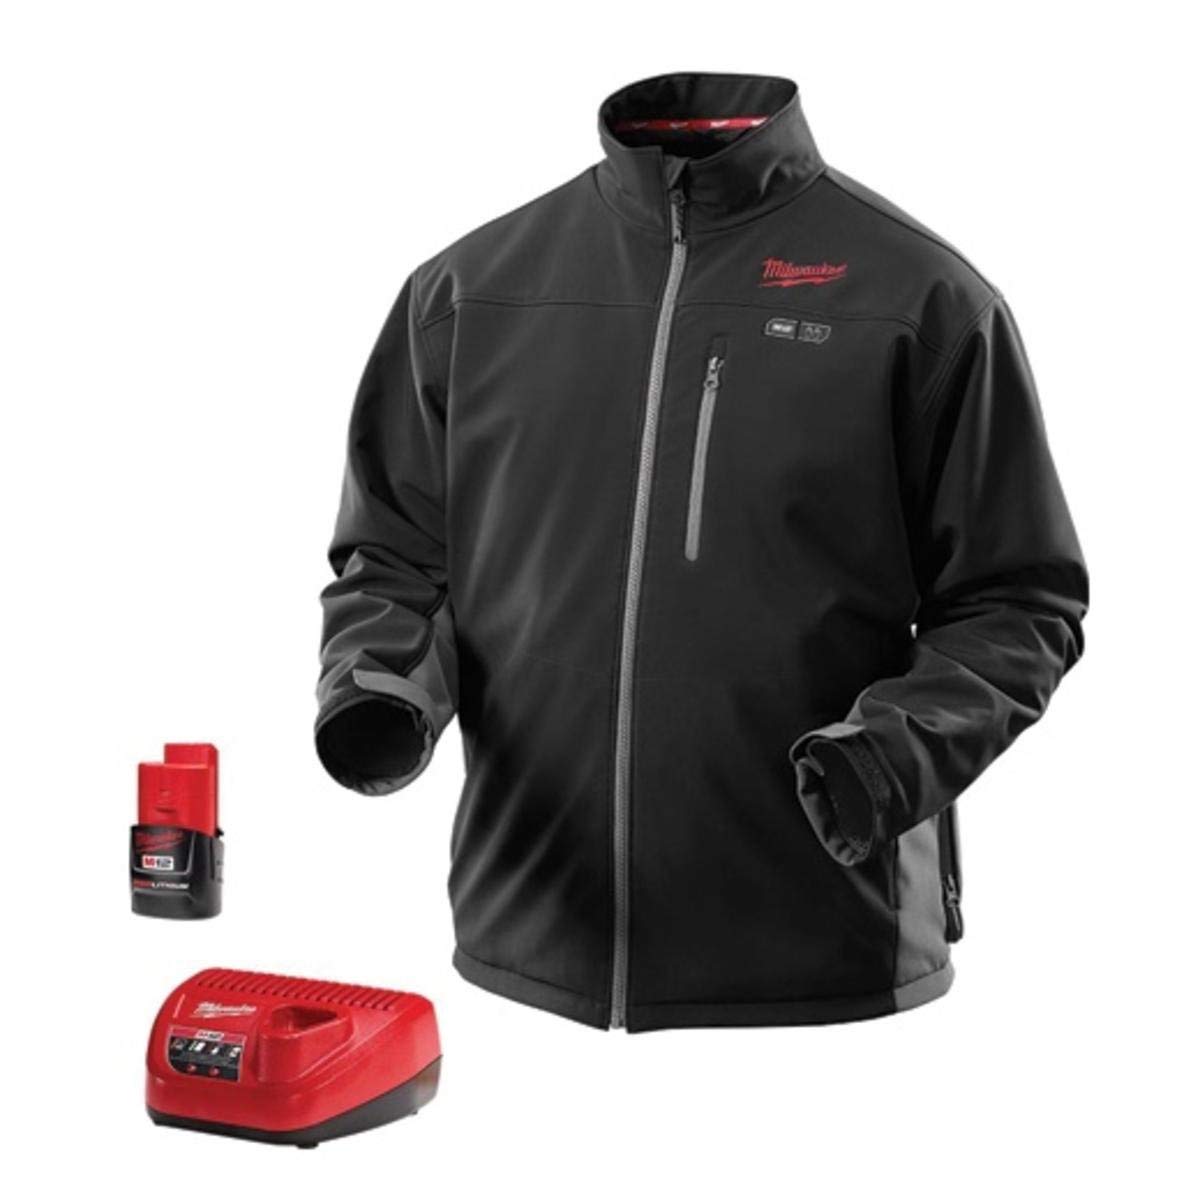 Battery Powered Heated Jacket By Milwaukee For The Warmth You Need